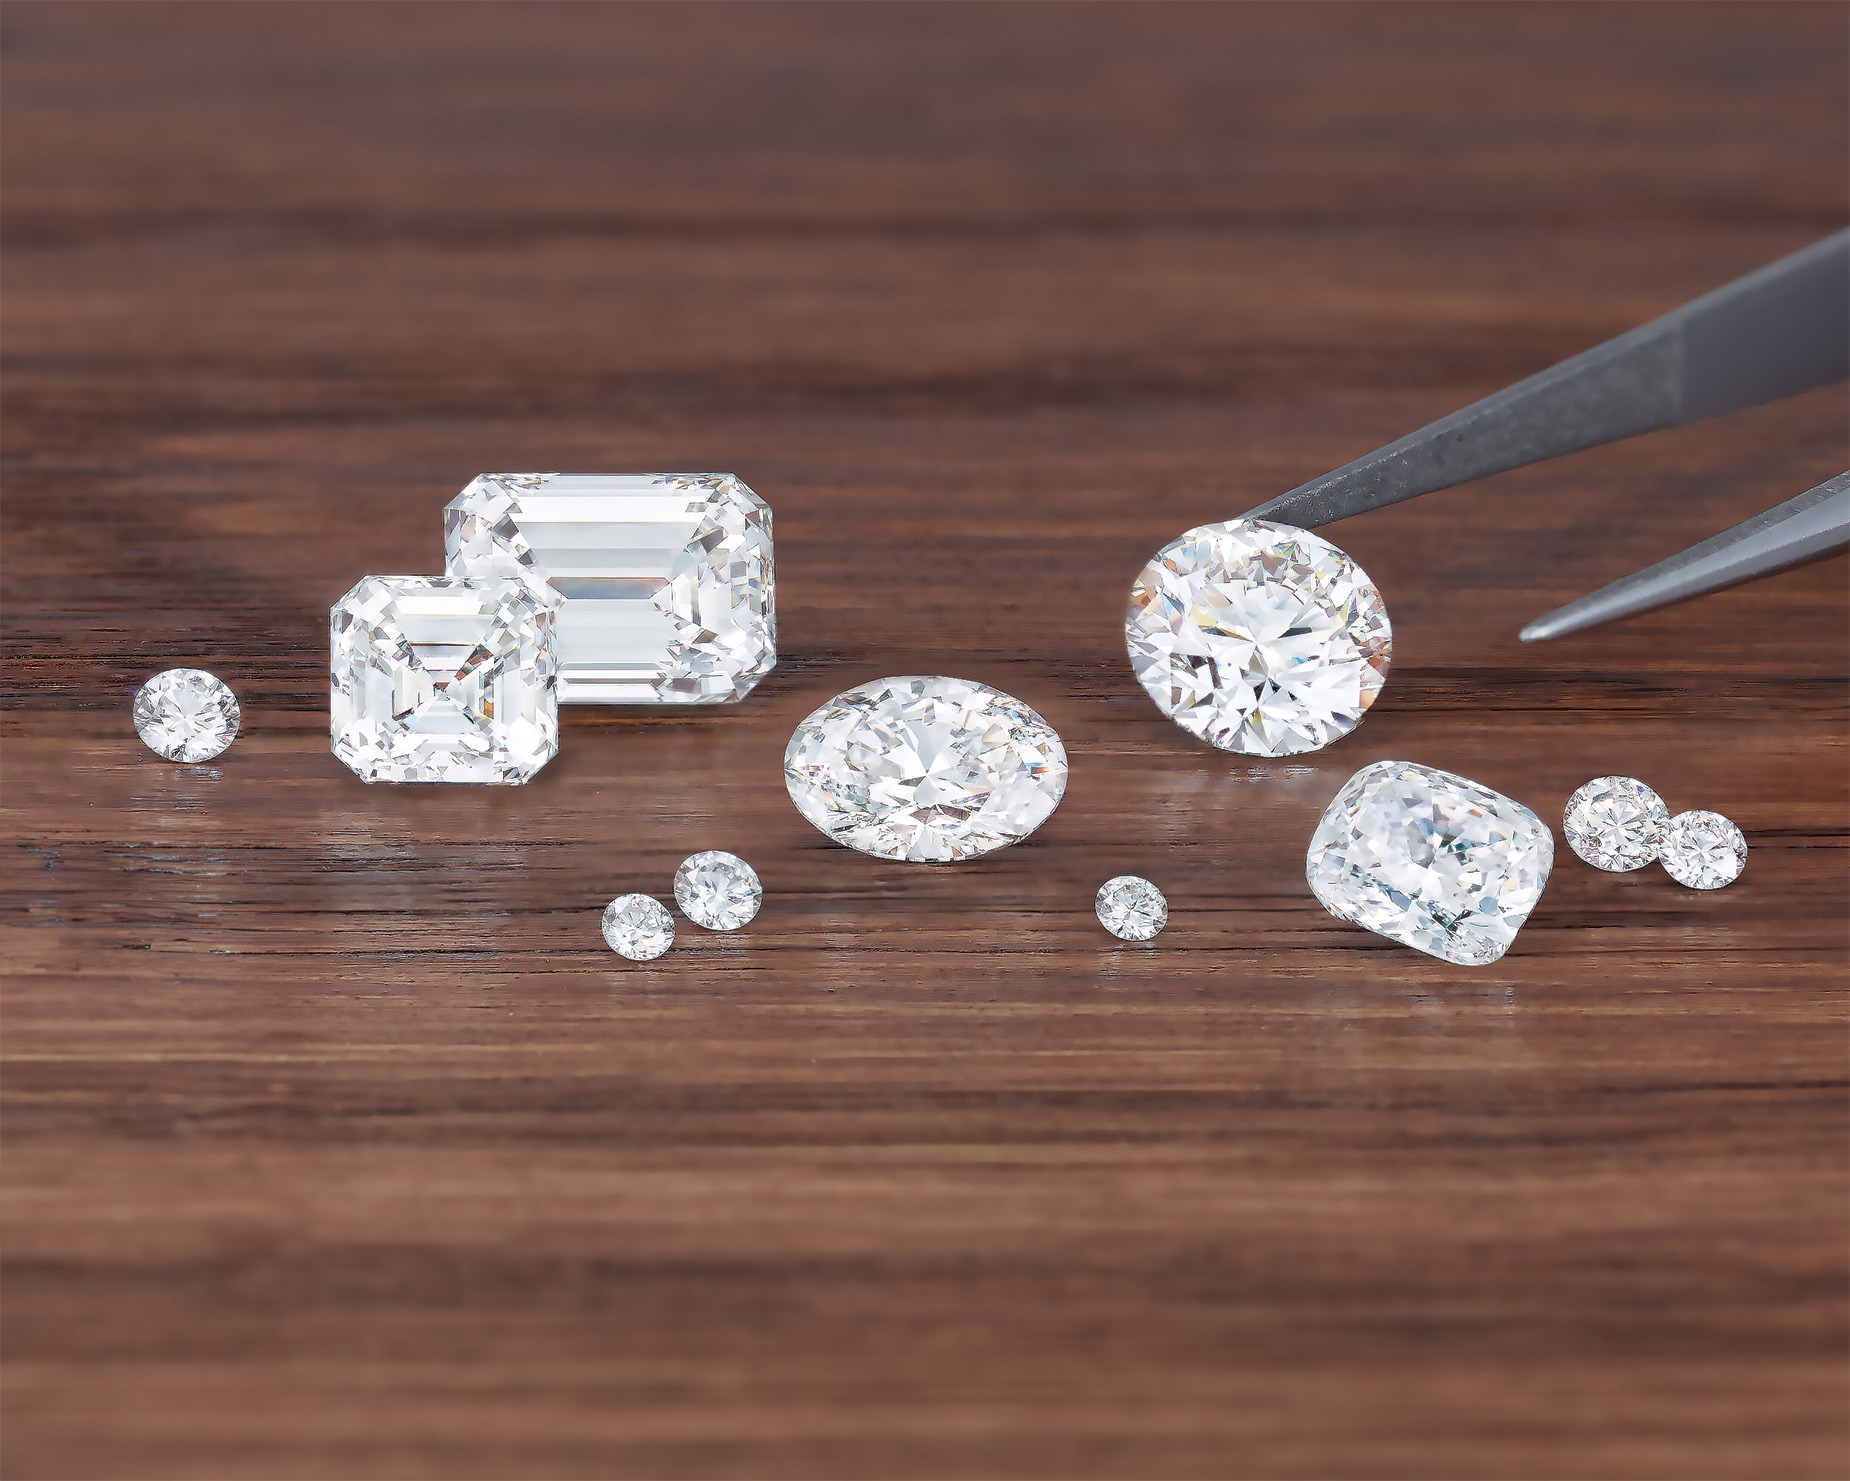 Diamonds and Gemstones With Known Origin: What Is Provenance? - Stuller ...